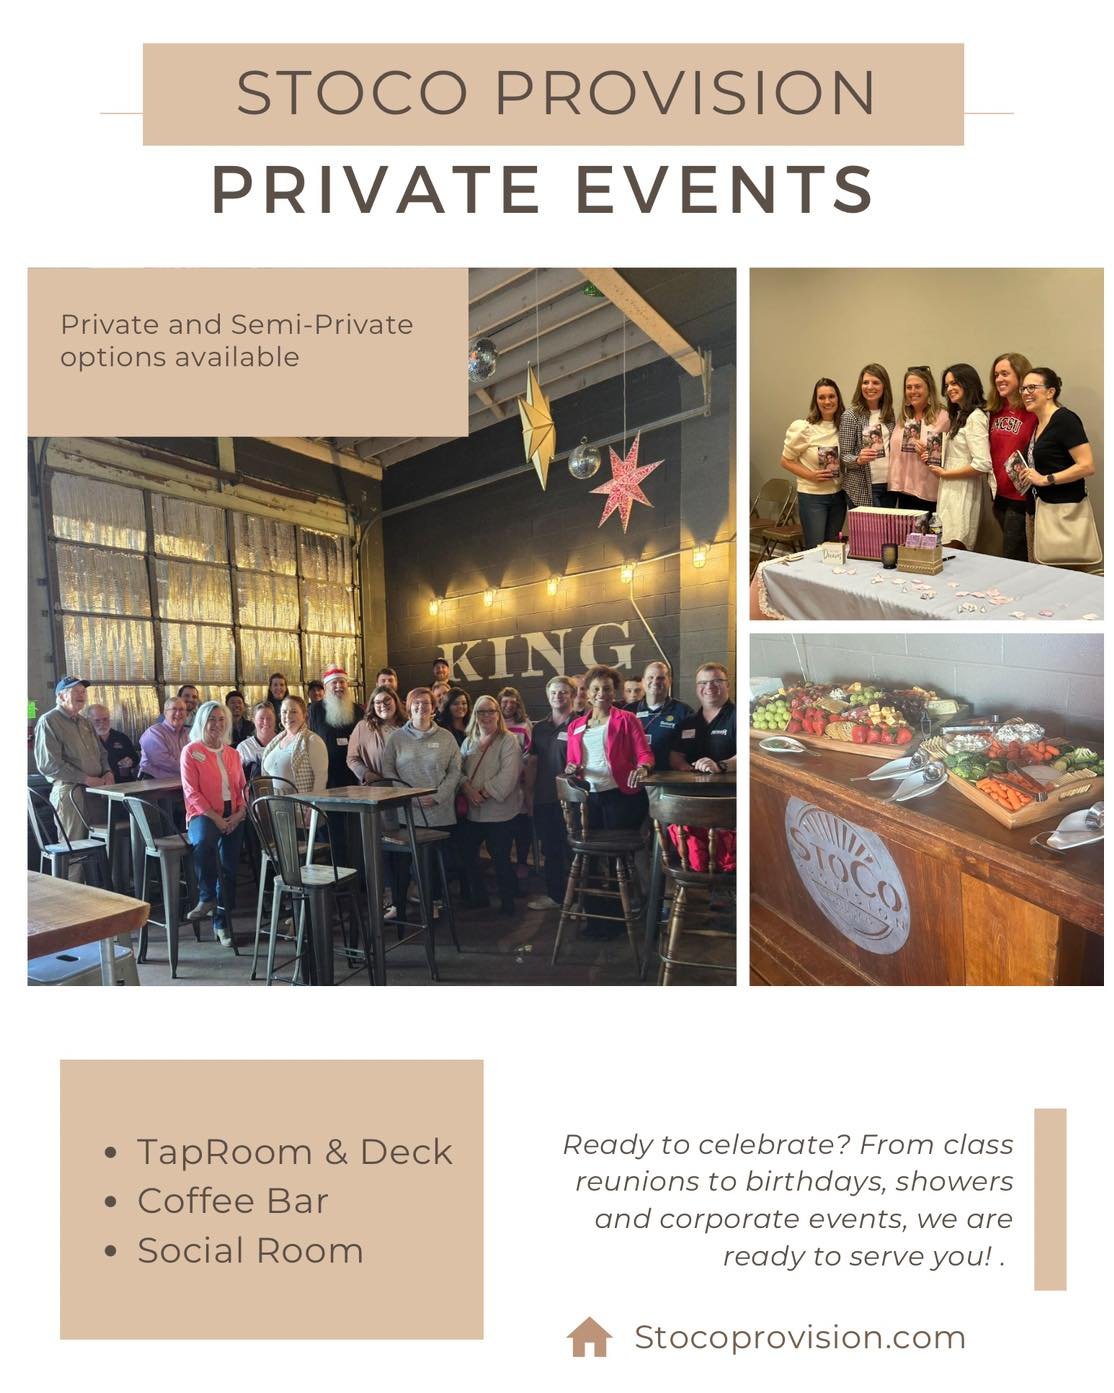 Spring is here and the is the perfect time to plan your special event! We have a few dates left in May, June and July for your Private Event celebration!

From the Sweet 16 to 70 and sassy; corporate event or a fun baby shower, the Tap Room, Coffee B